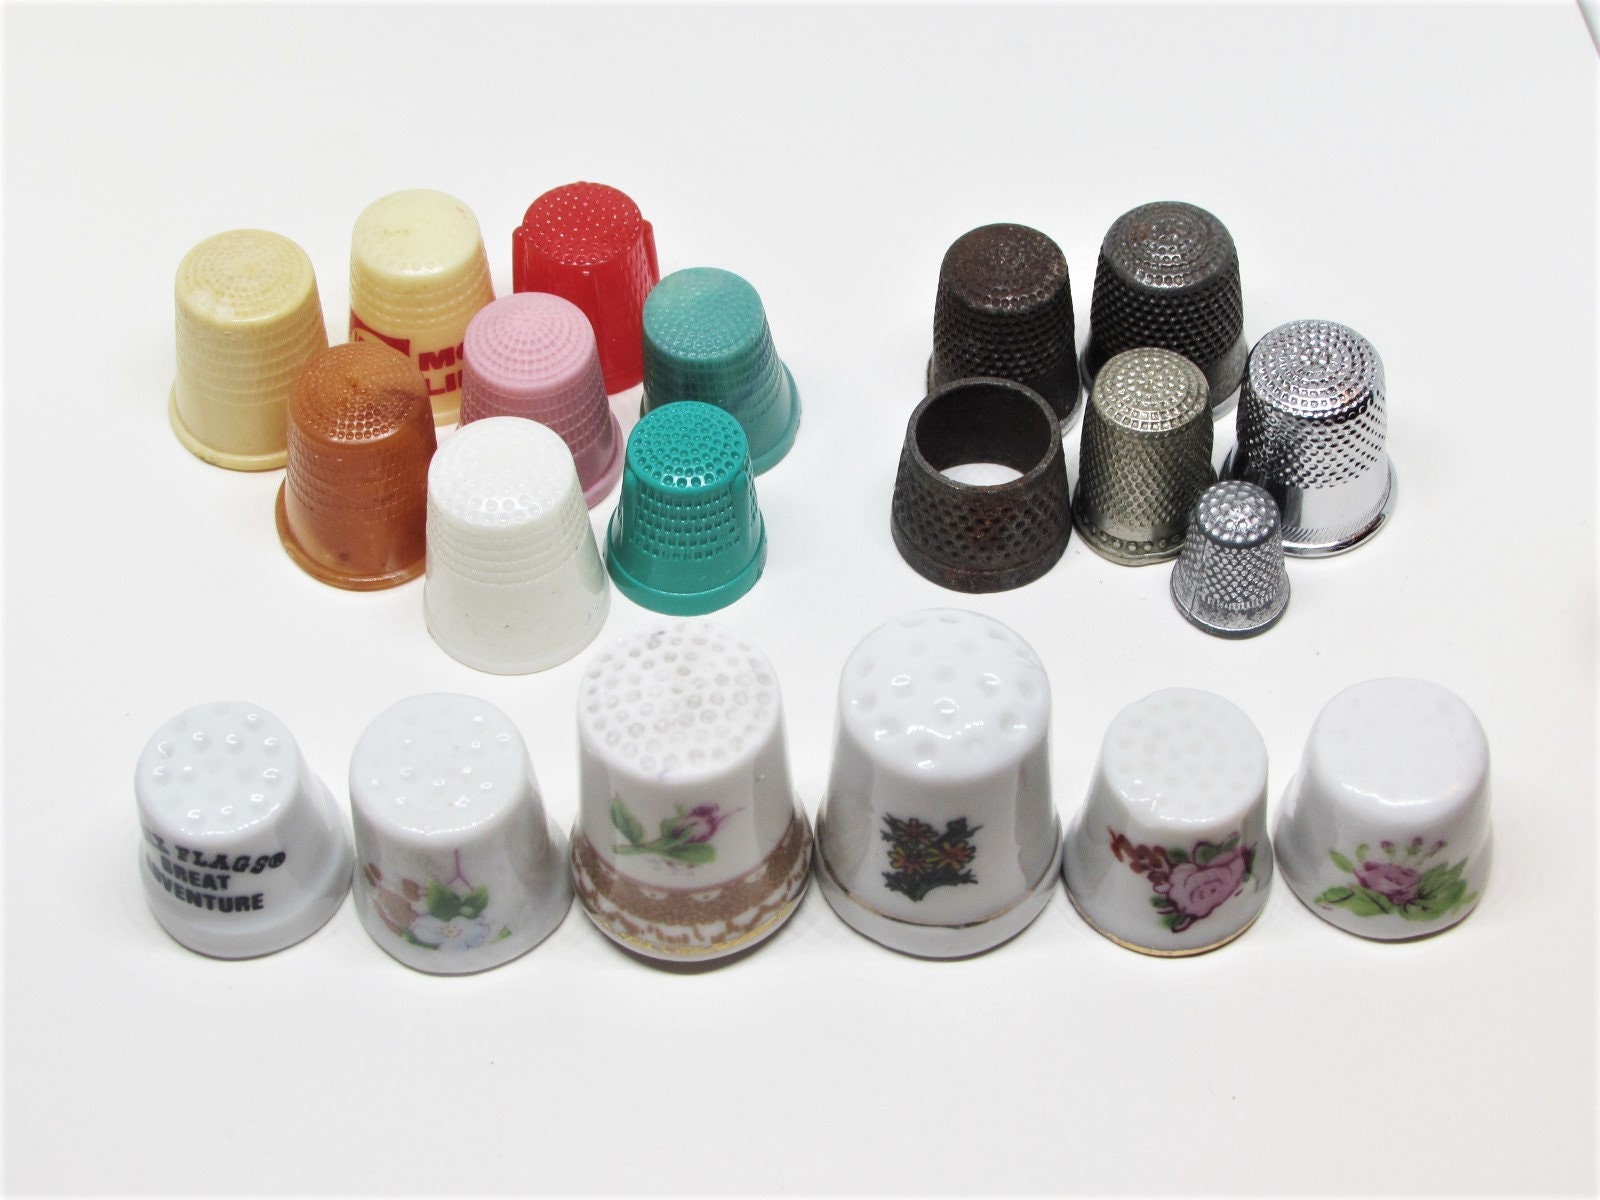 25 Porcelain Flower Thimbles Set Sewing Collectible - collectibles